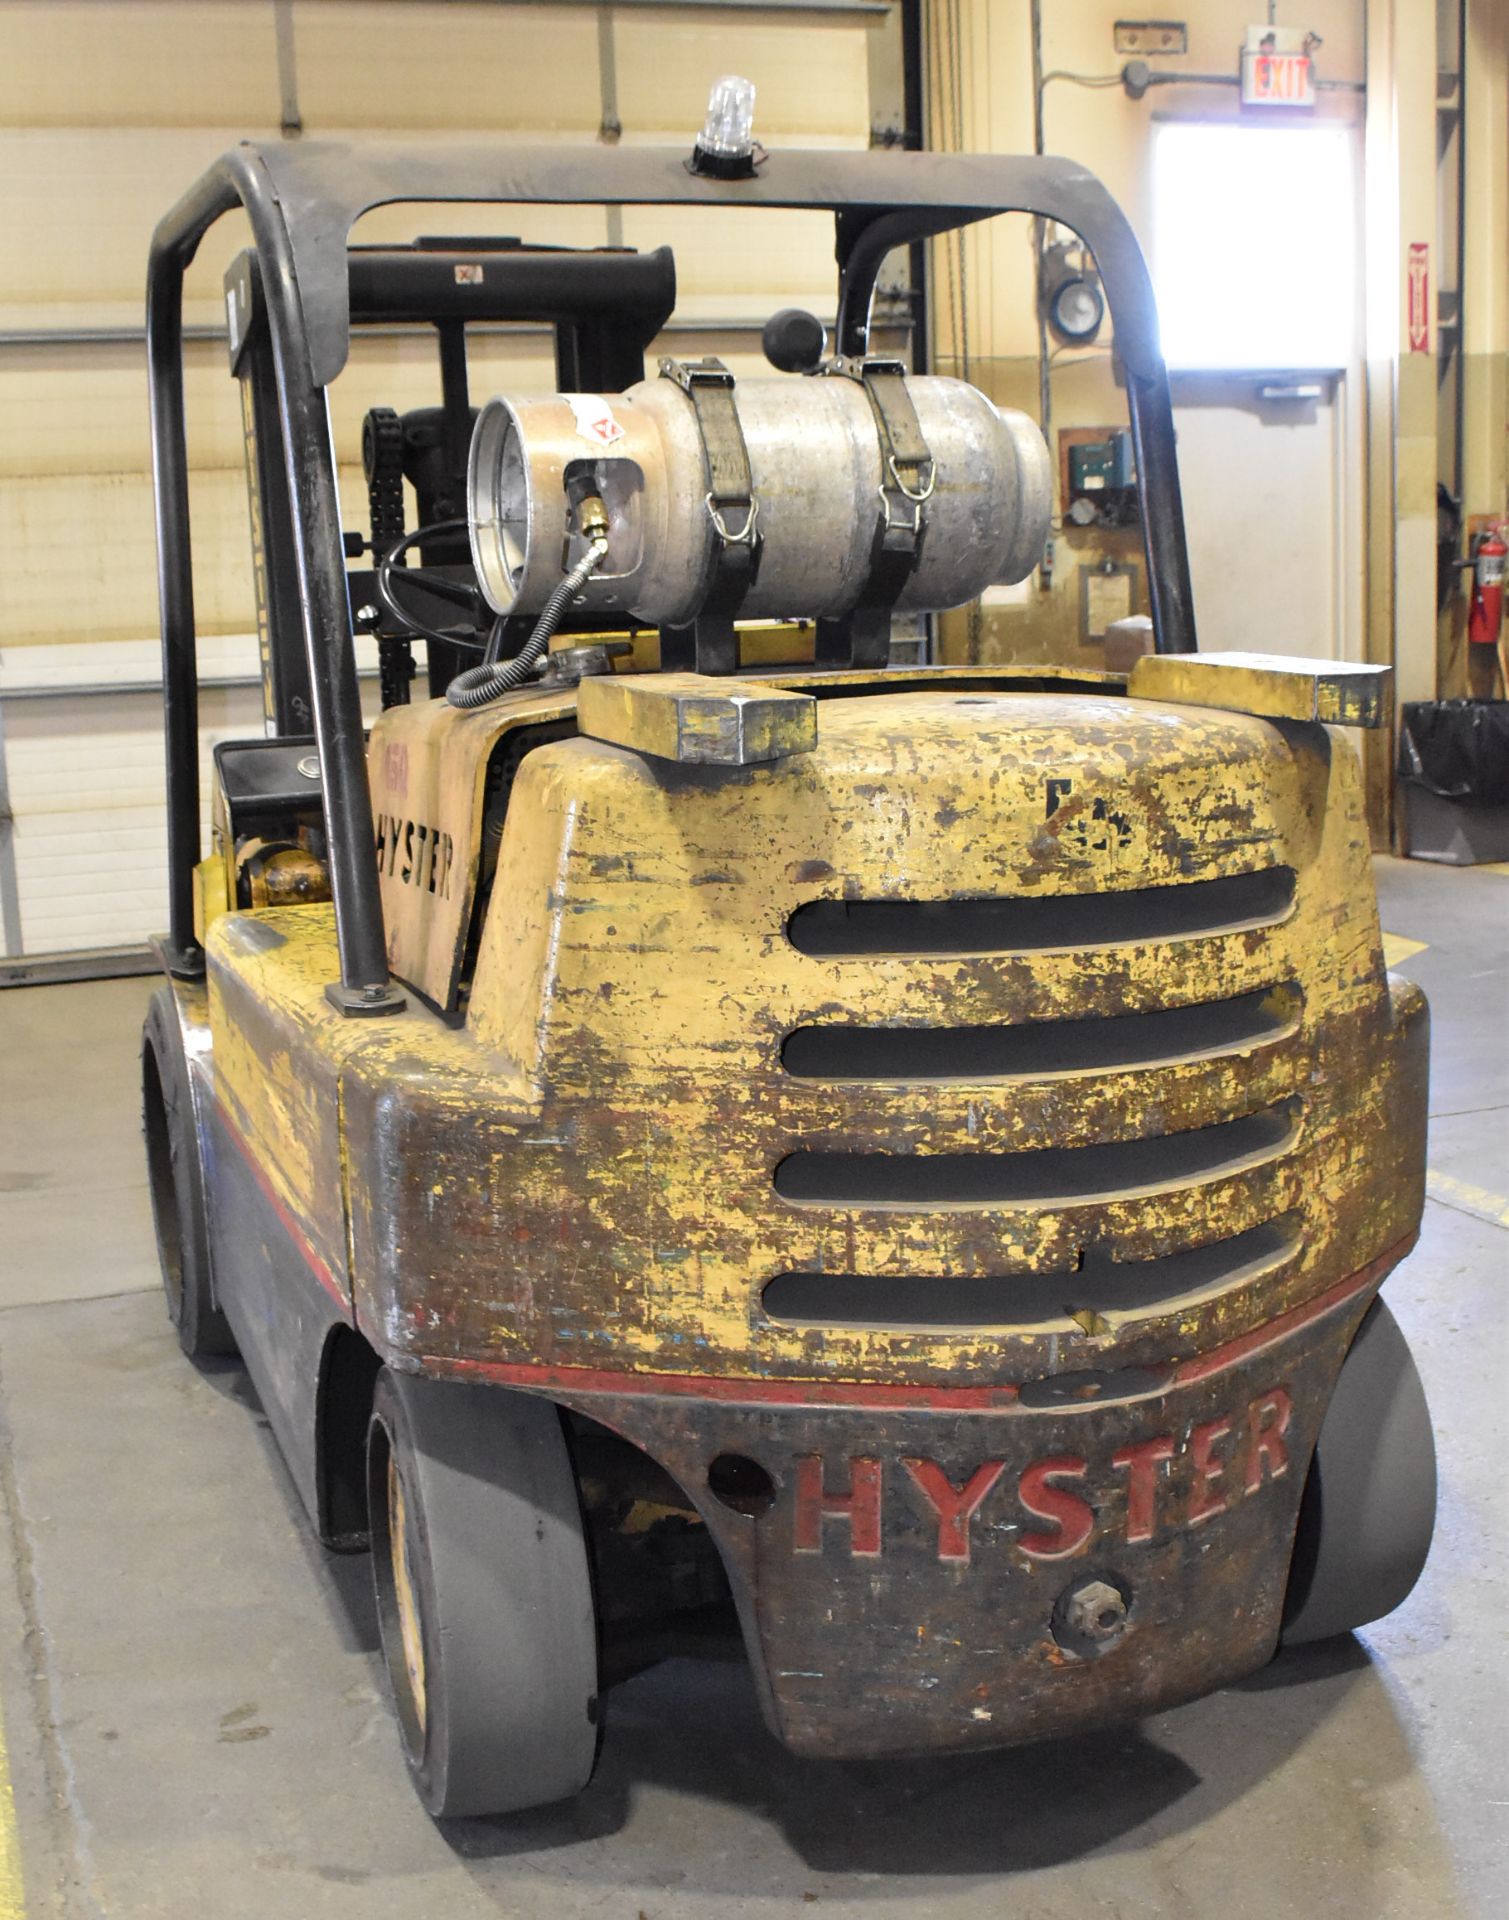 HYSTER S150A 15,000 LB. CAPACITY LPG FORKLIFT WITH 129" MAX. LIFT HEIGHT, 2-STAGE MAST, SOLID TIRES, - Image 6 of 18